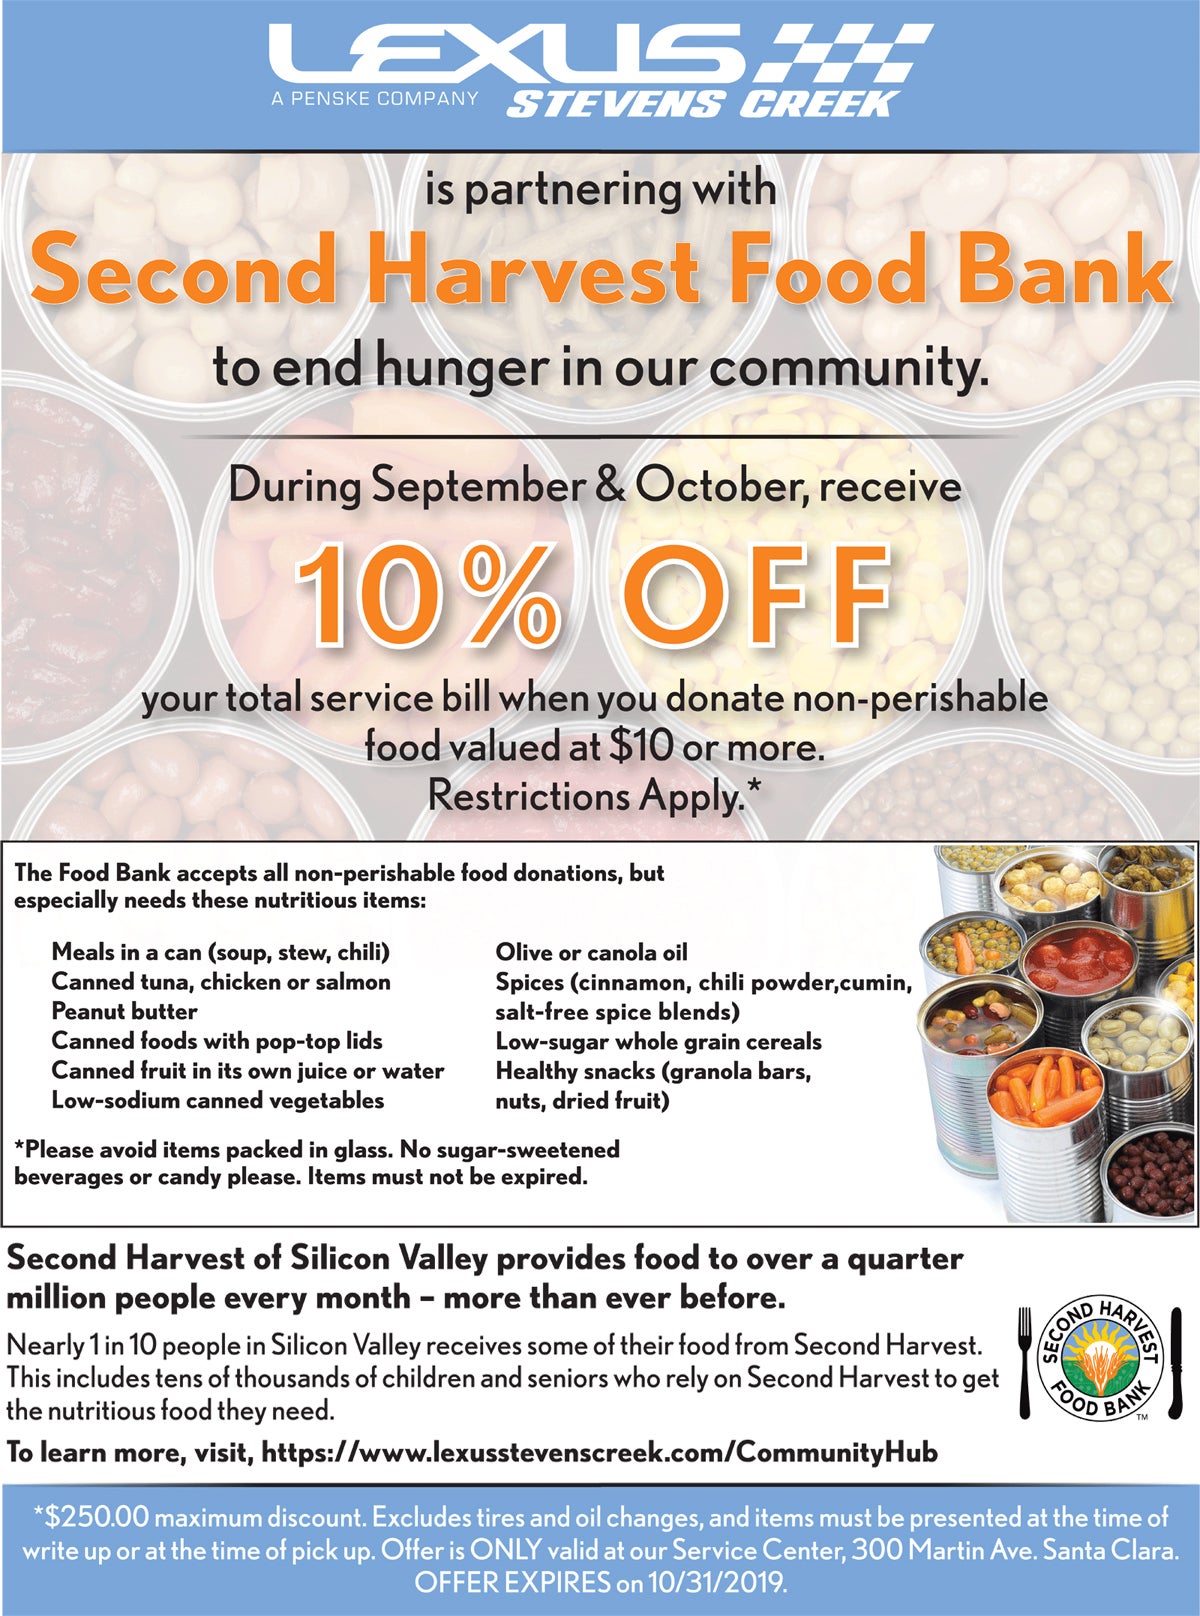 Second Harvest Food Bank to end hunger in our community